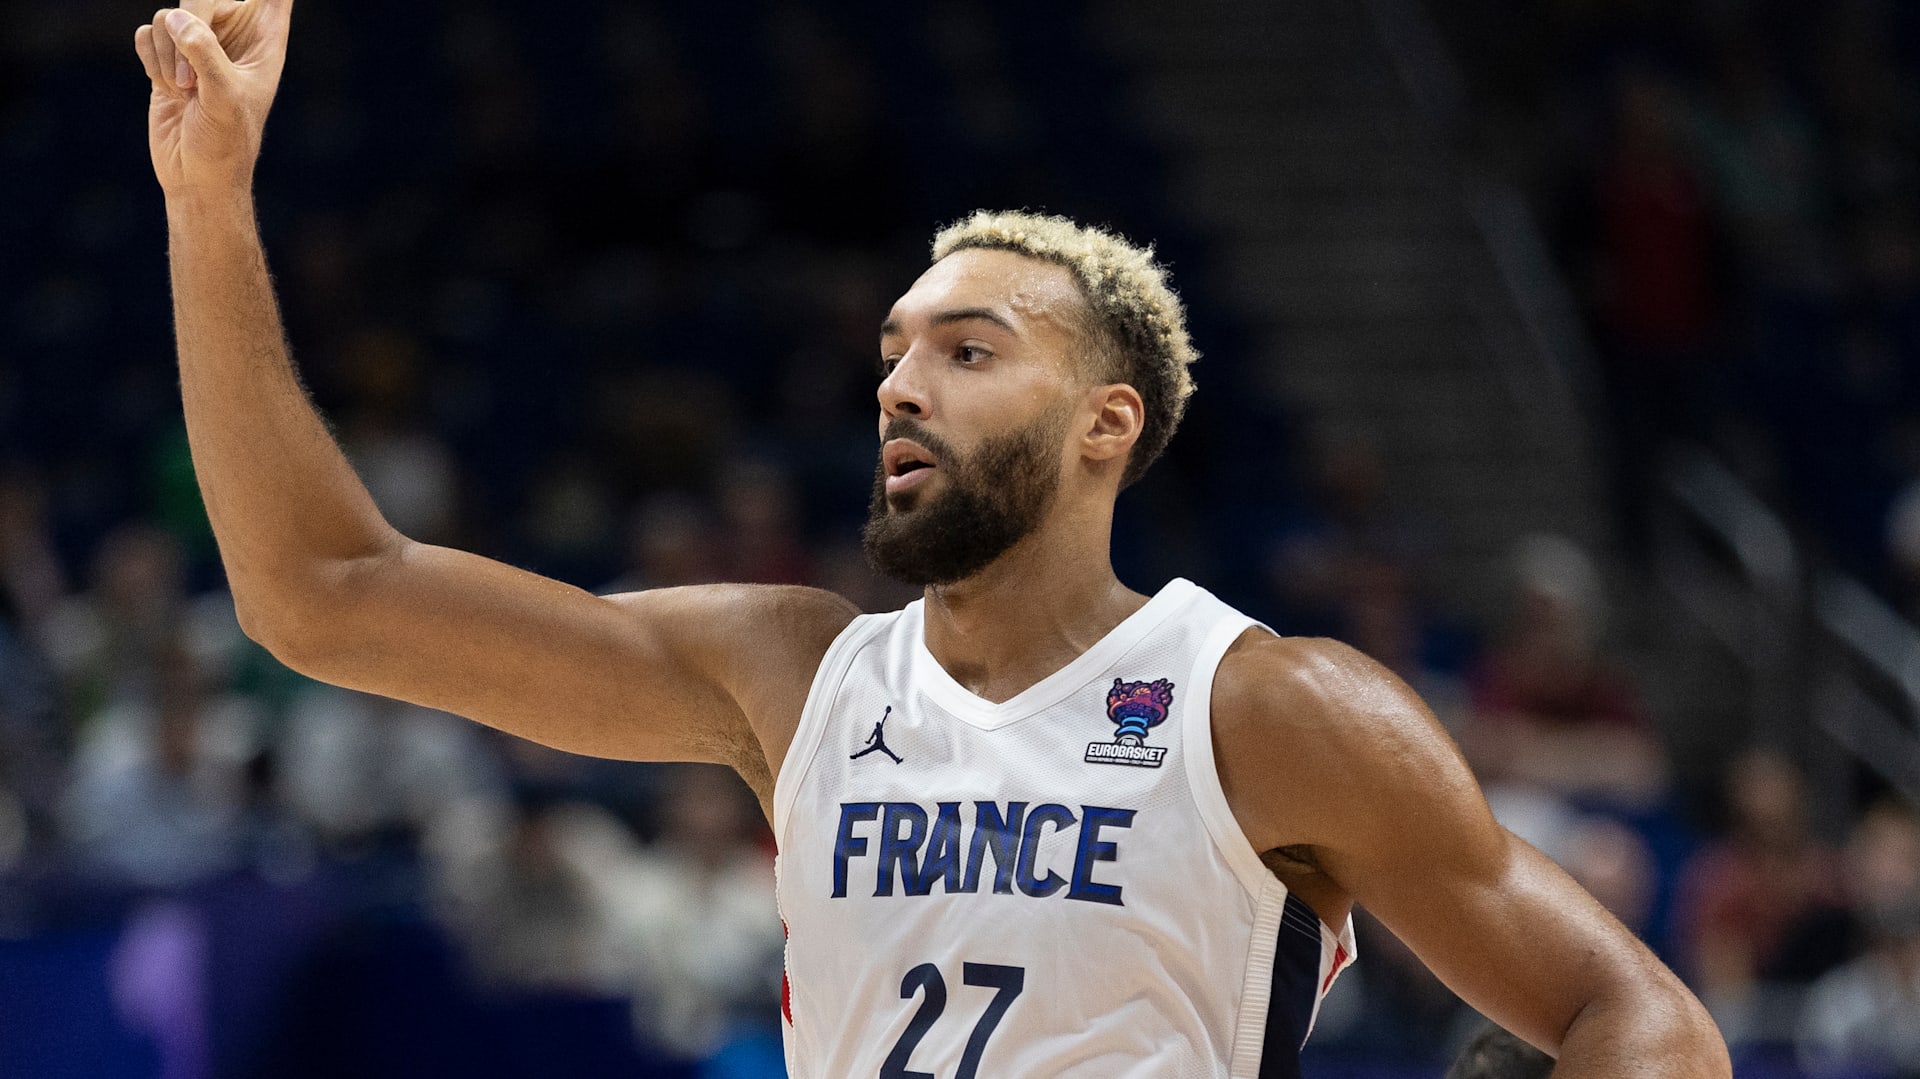 EuroBasket 2022 Semi-finals preview, schedule and how to watch NBA stars